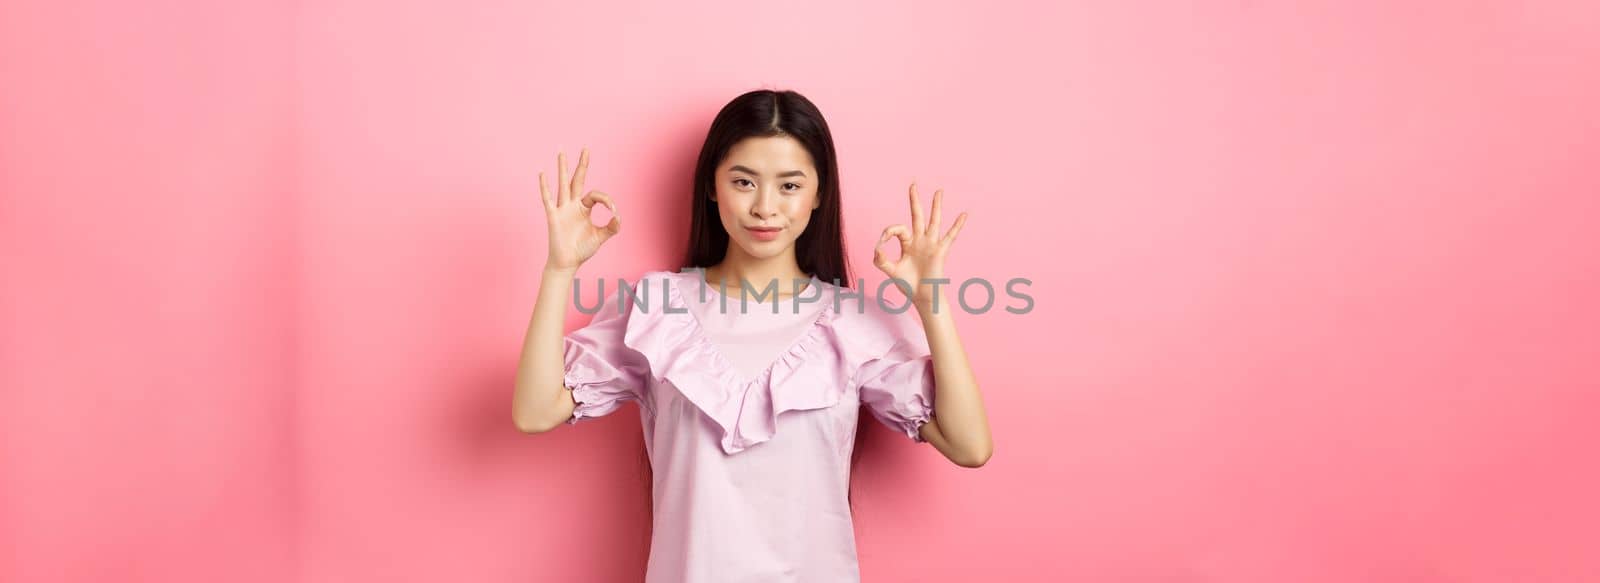 Smiling asian woman showing okay signs and looking confident, assure all good, praise good work, nice choice gesture, standing on pink background.